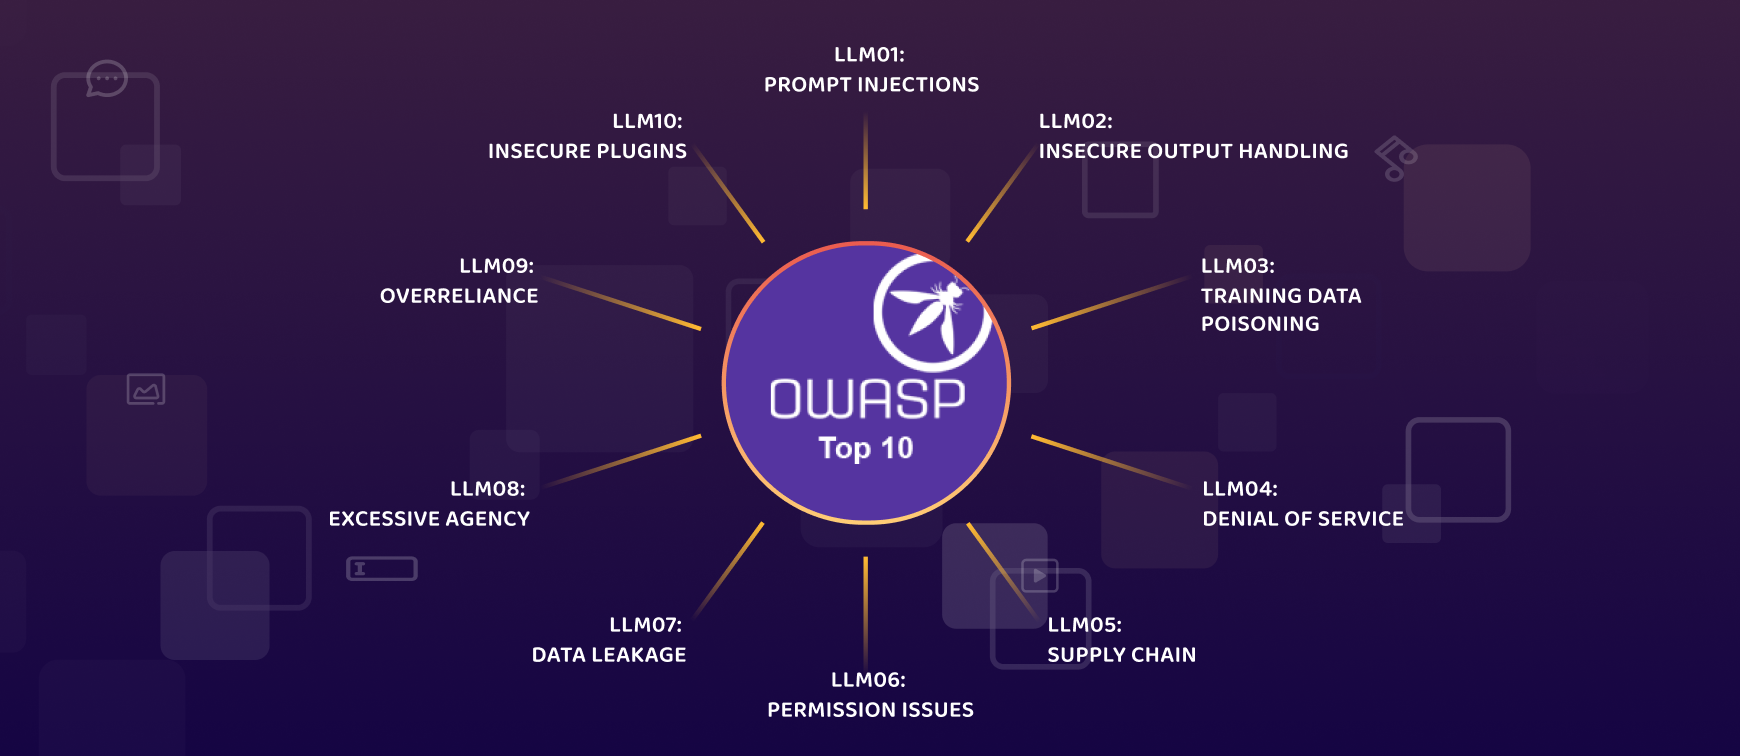 OWASP Top 10 Essential Tips for Securing LLMs: Guide to Improved LLM Safety